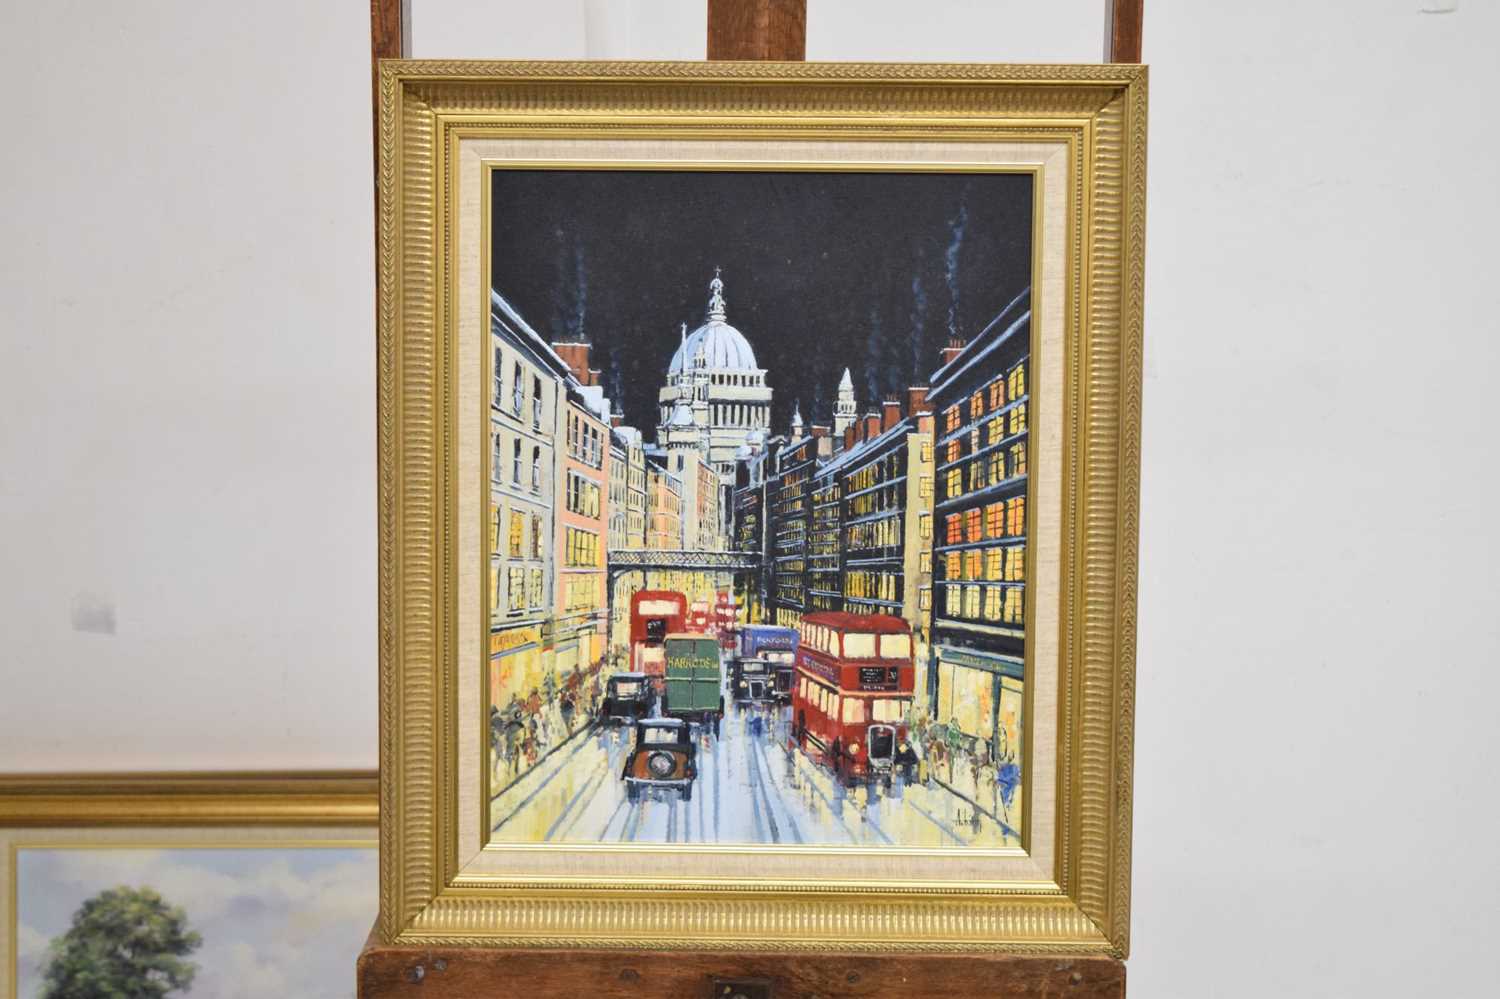 Alan King (1946-2013) - Oil on canvas - 'London Impressions', towards St. Pauls - Image 8 of 9